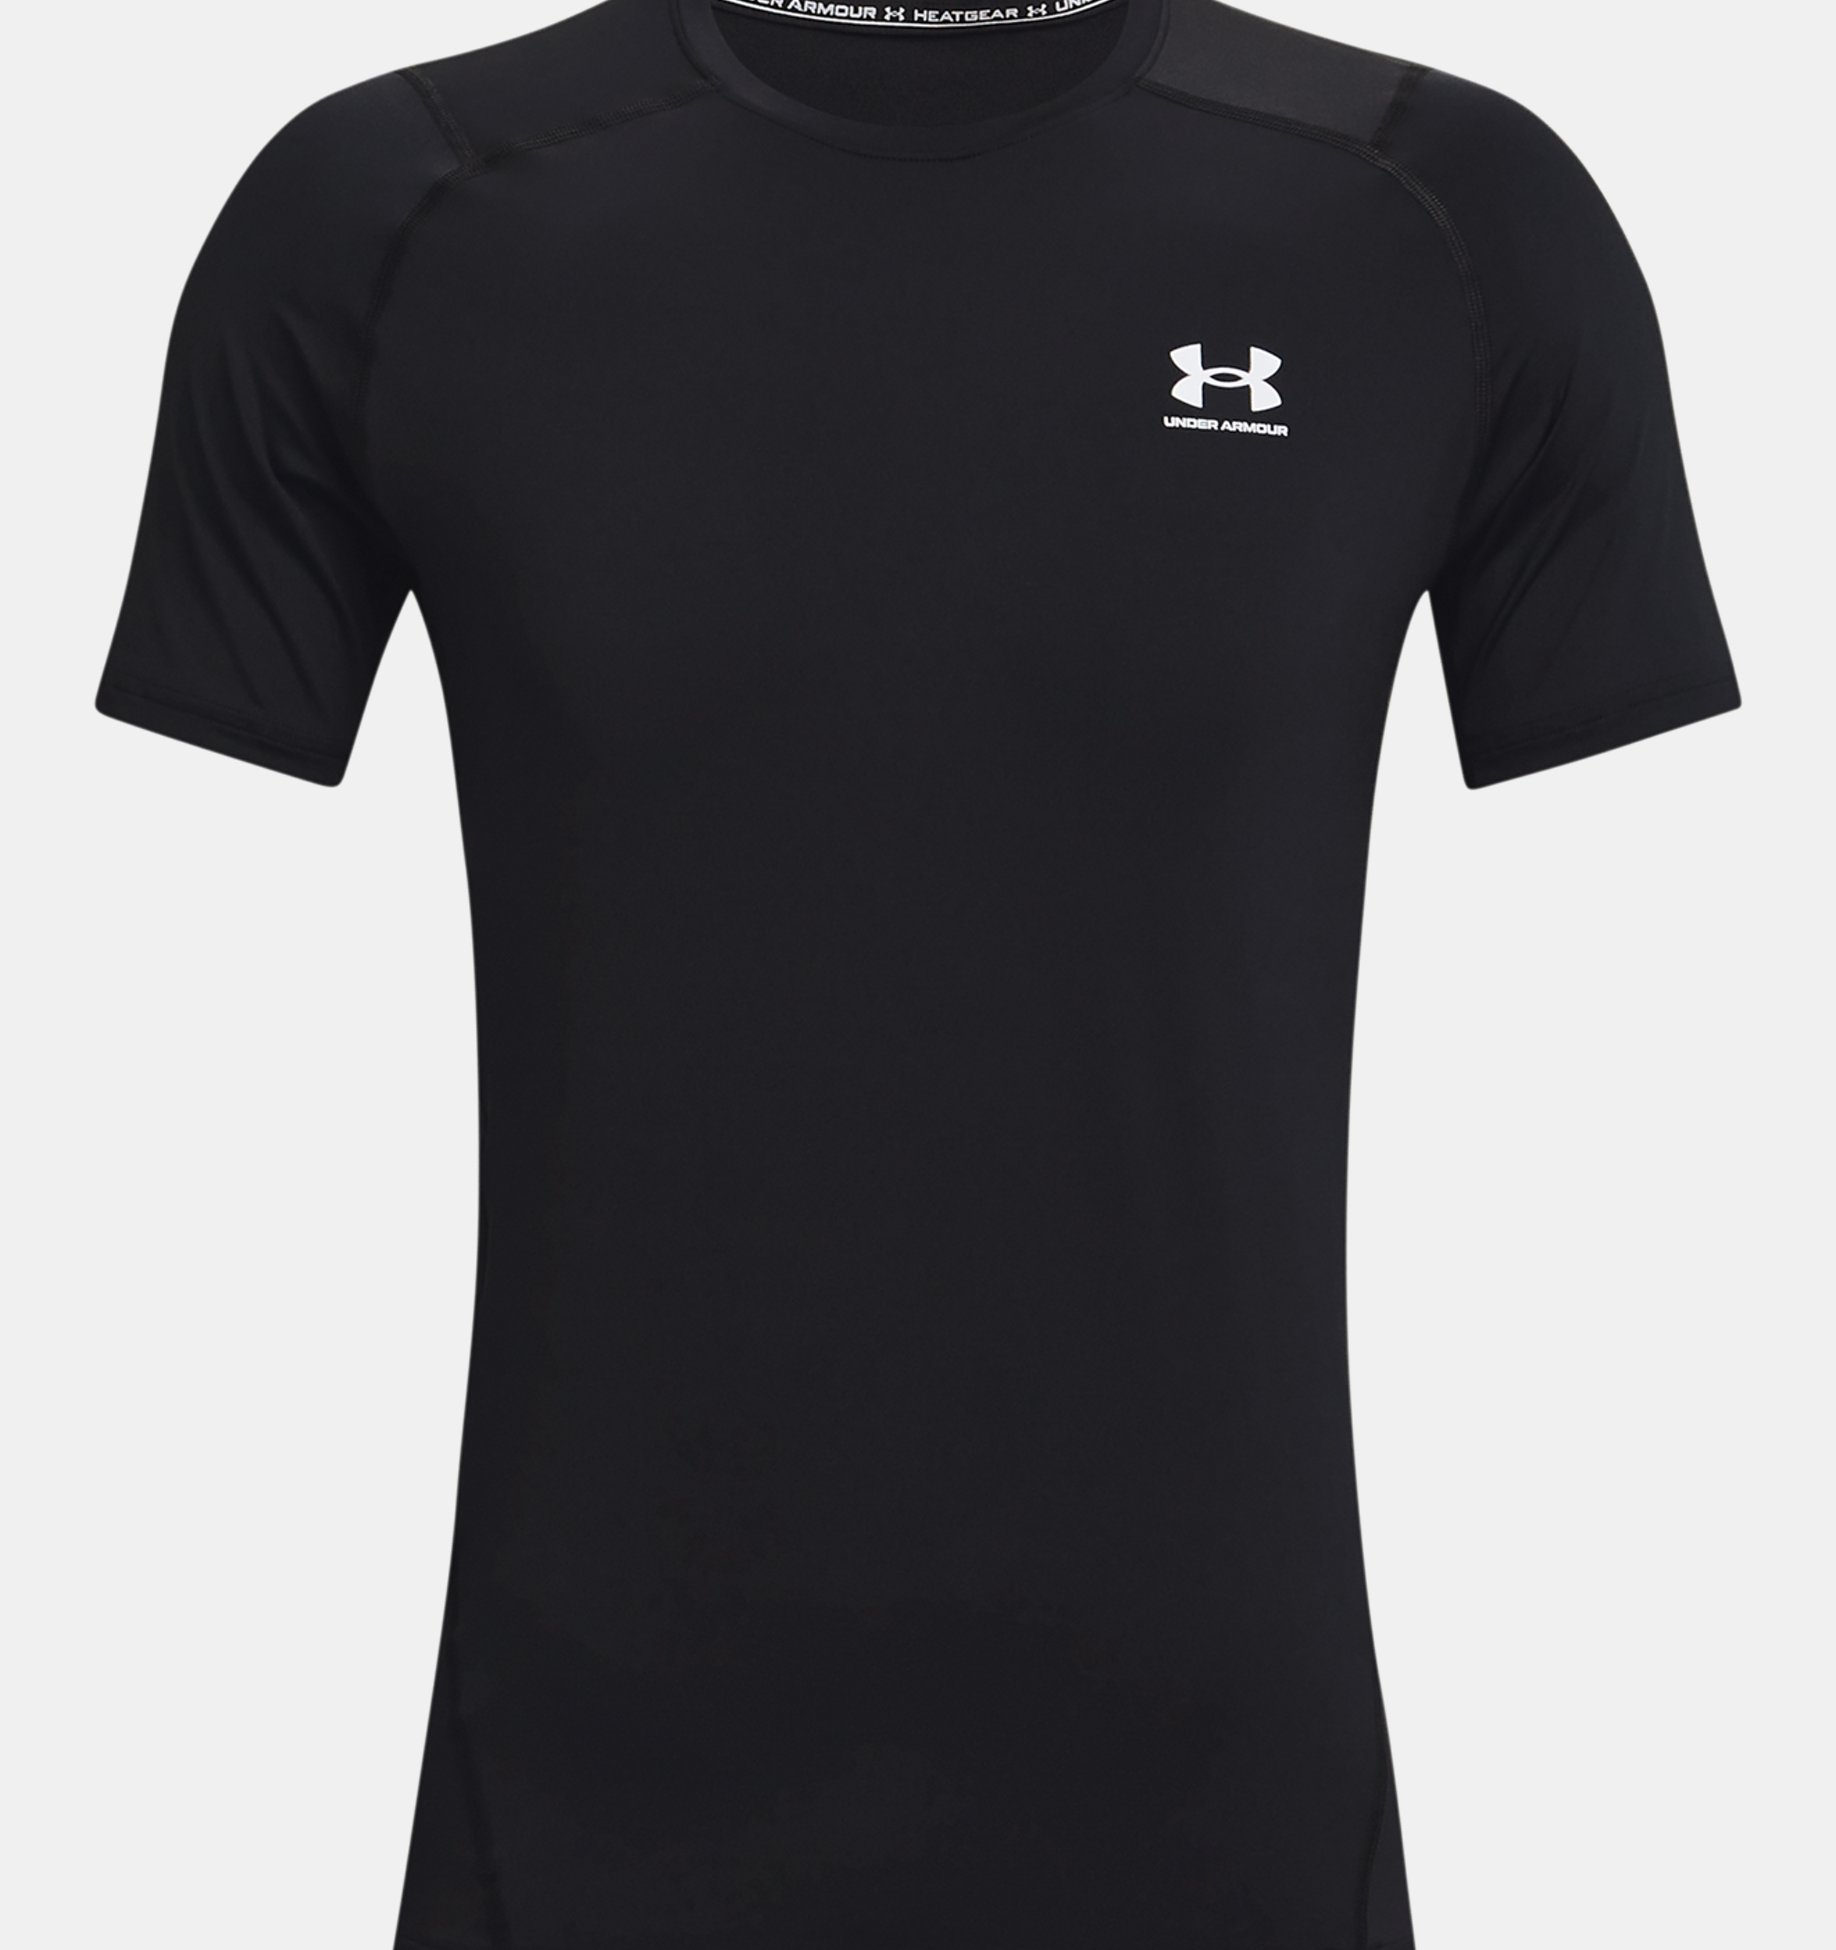 cultura Confuso Énfasis Men's HeatGear® Fitted Short Sleeve | Under Armour